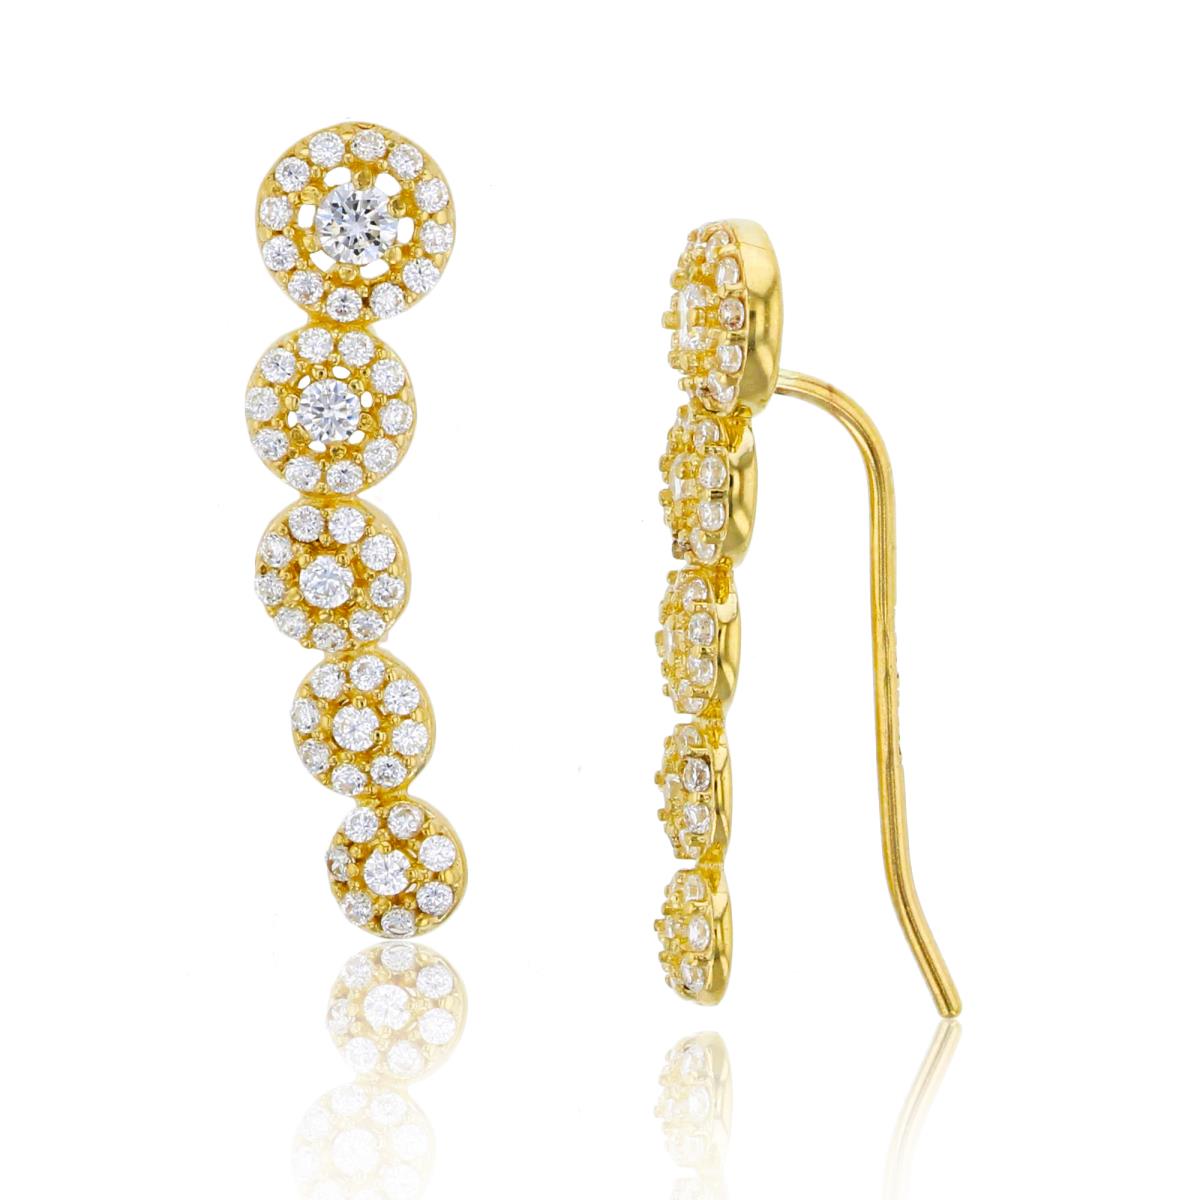 10K Yellow Gold Micropave Graduated Clusters Ear Crawler